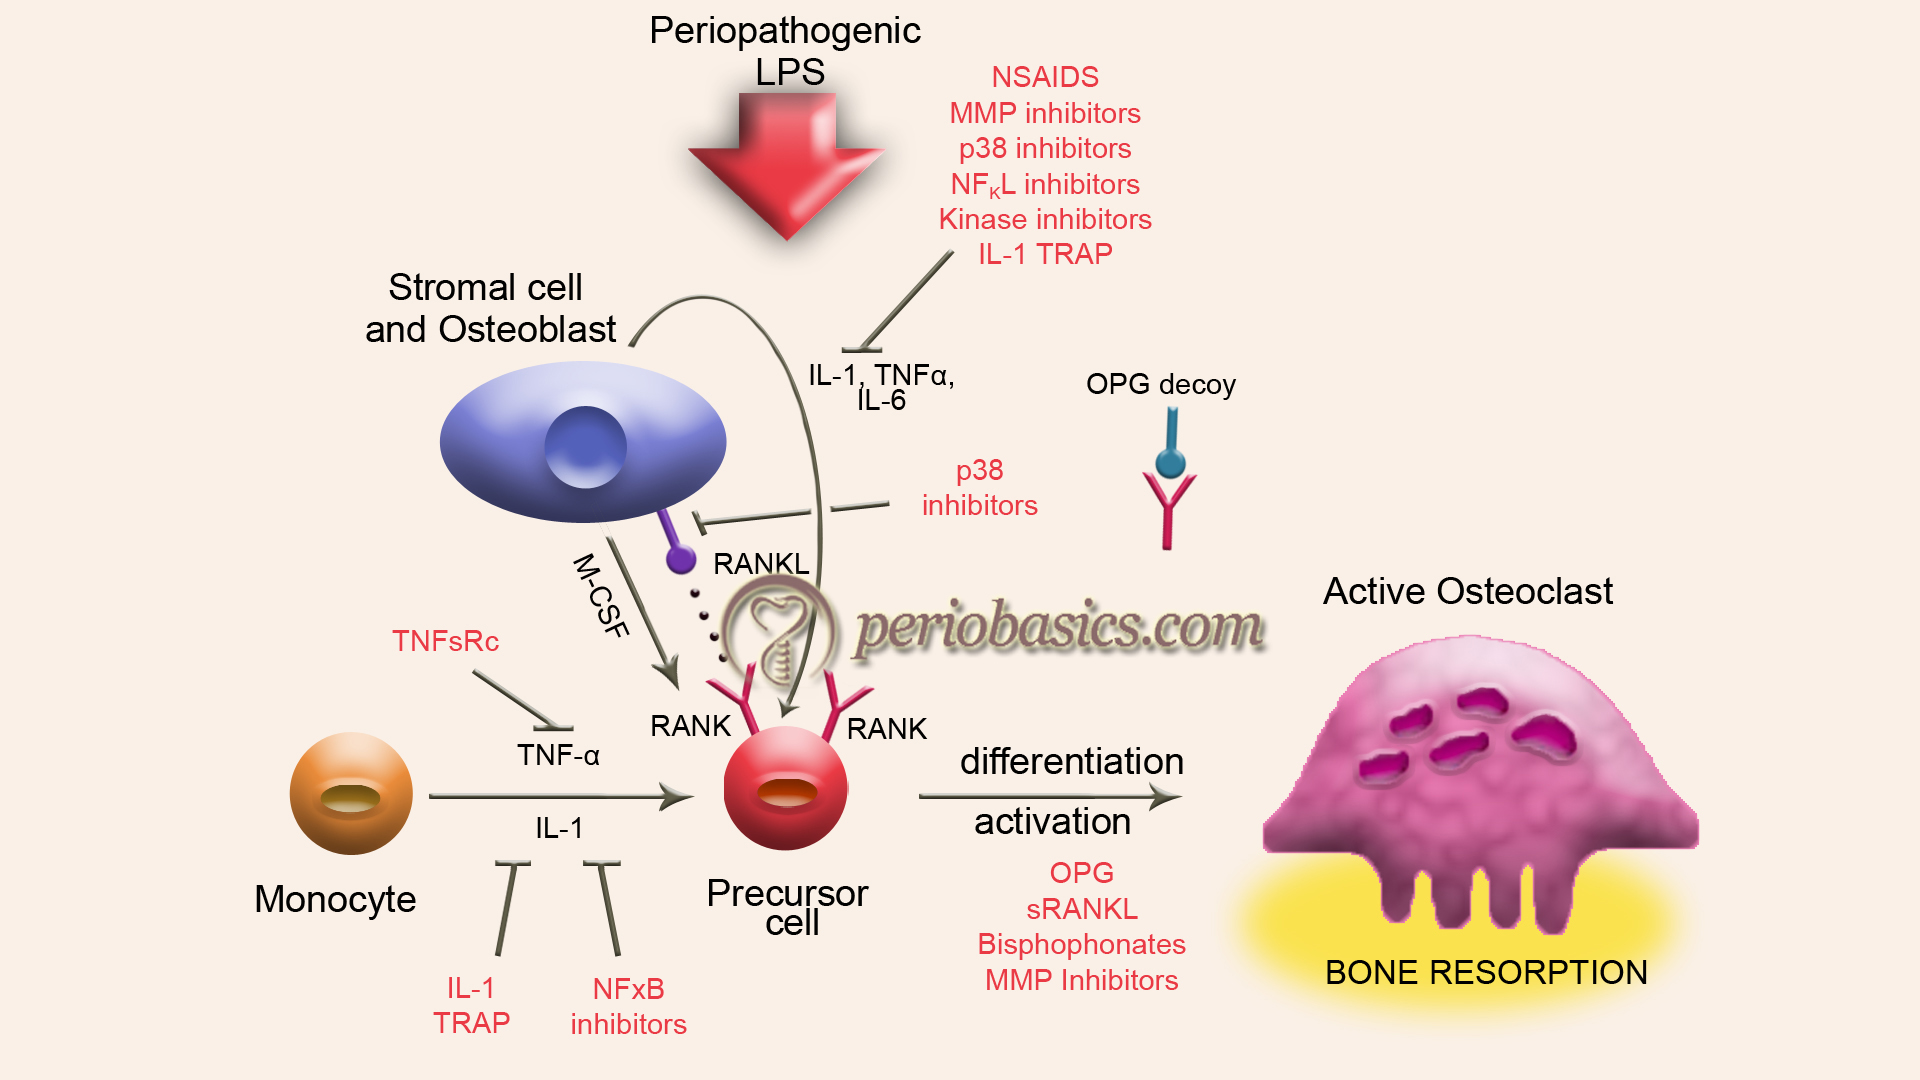 Regulation of osteoclast differentiation and function by RANK-RANKL and OPG.